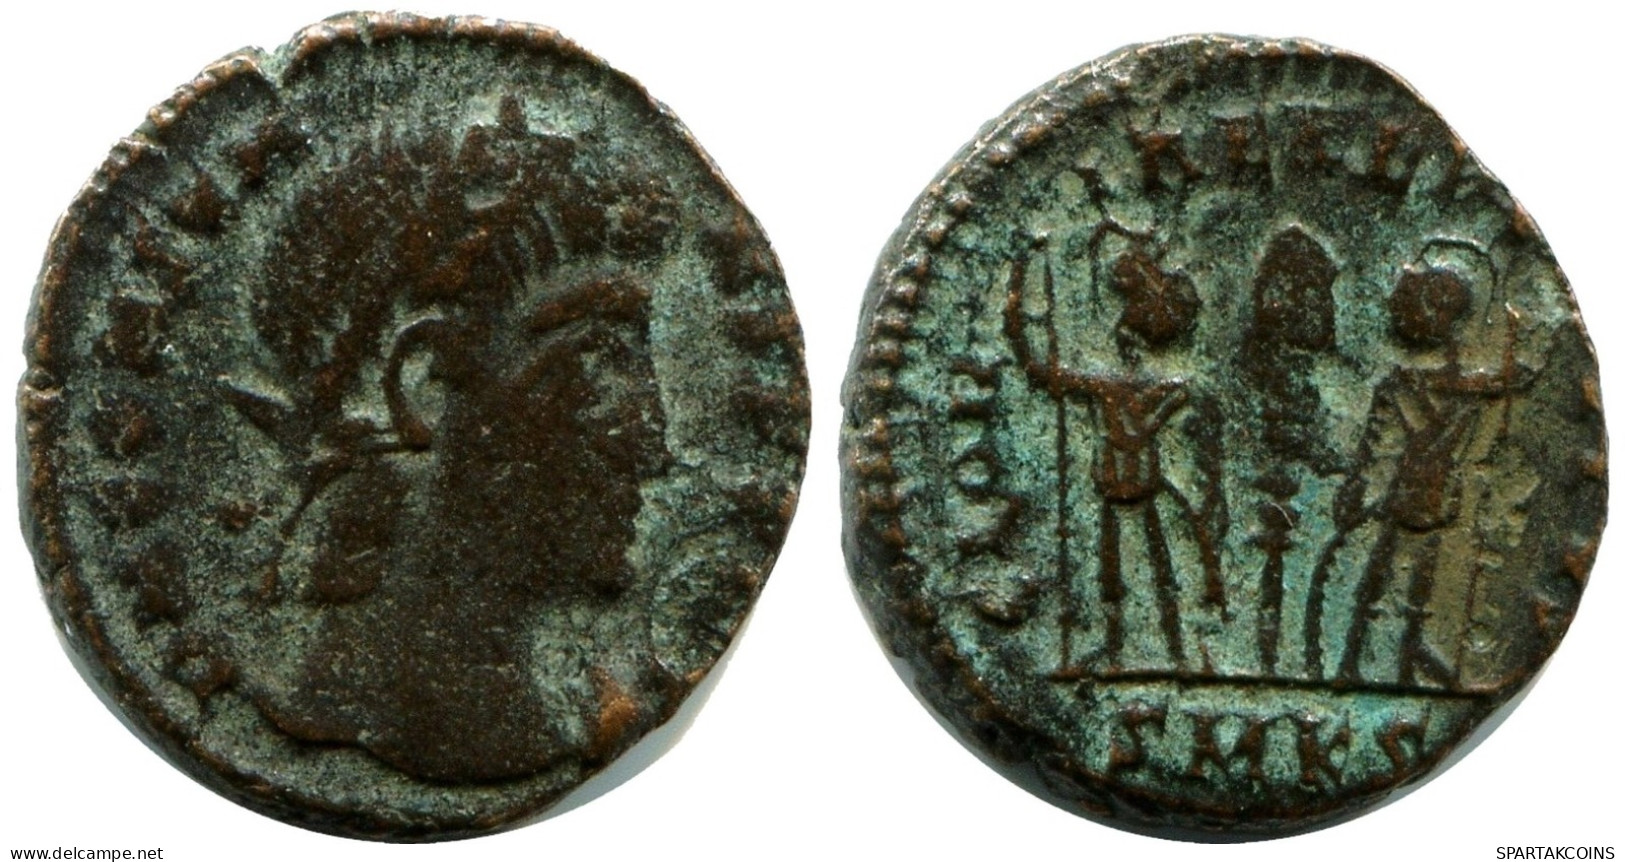 CONSTANS MINTED IN CYZICUS FROM THE ROYAL ONTARIO MUSEUM #ANC11692.14.U.A - El Impero Christiano (307 / 363)